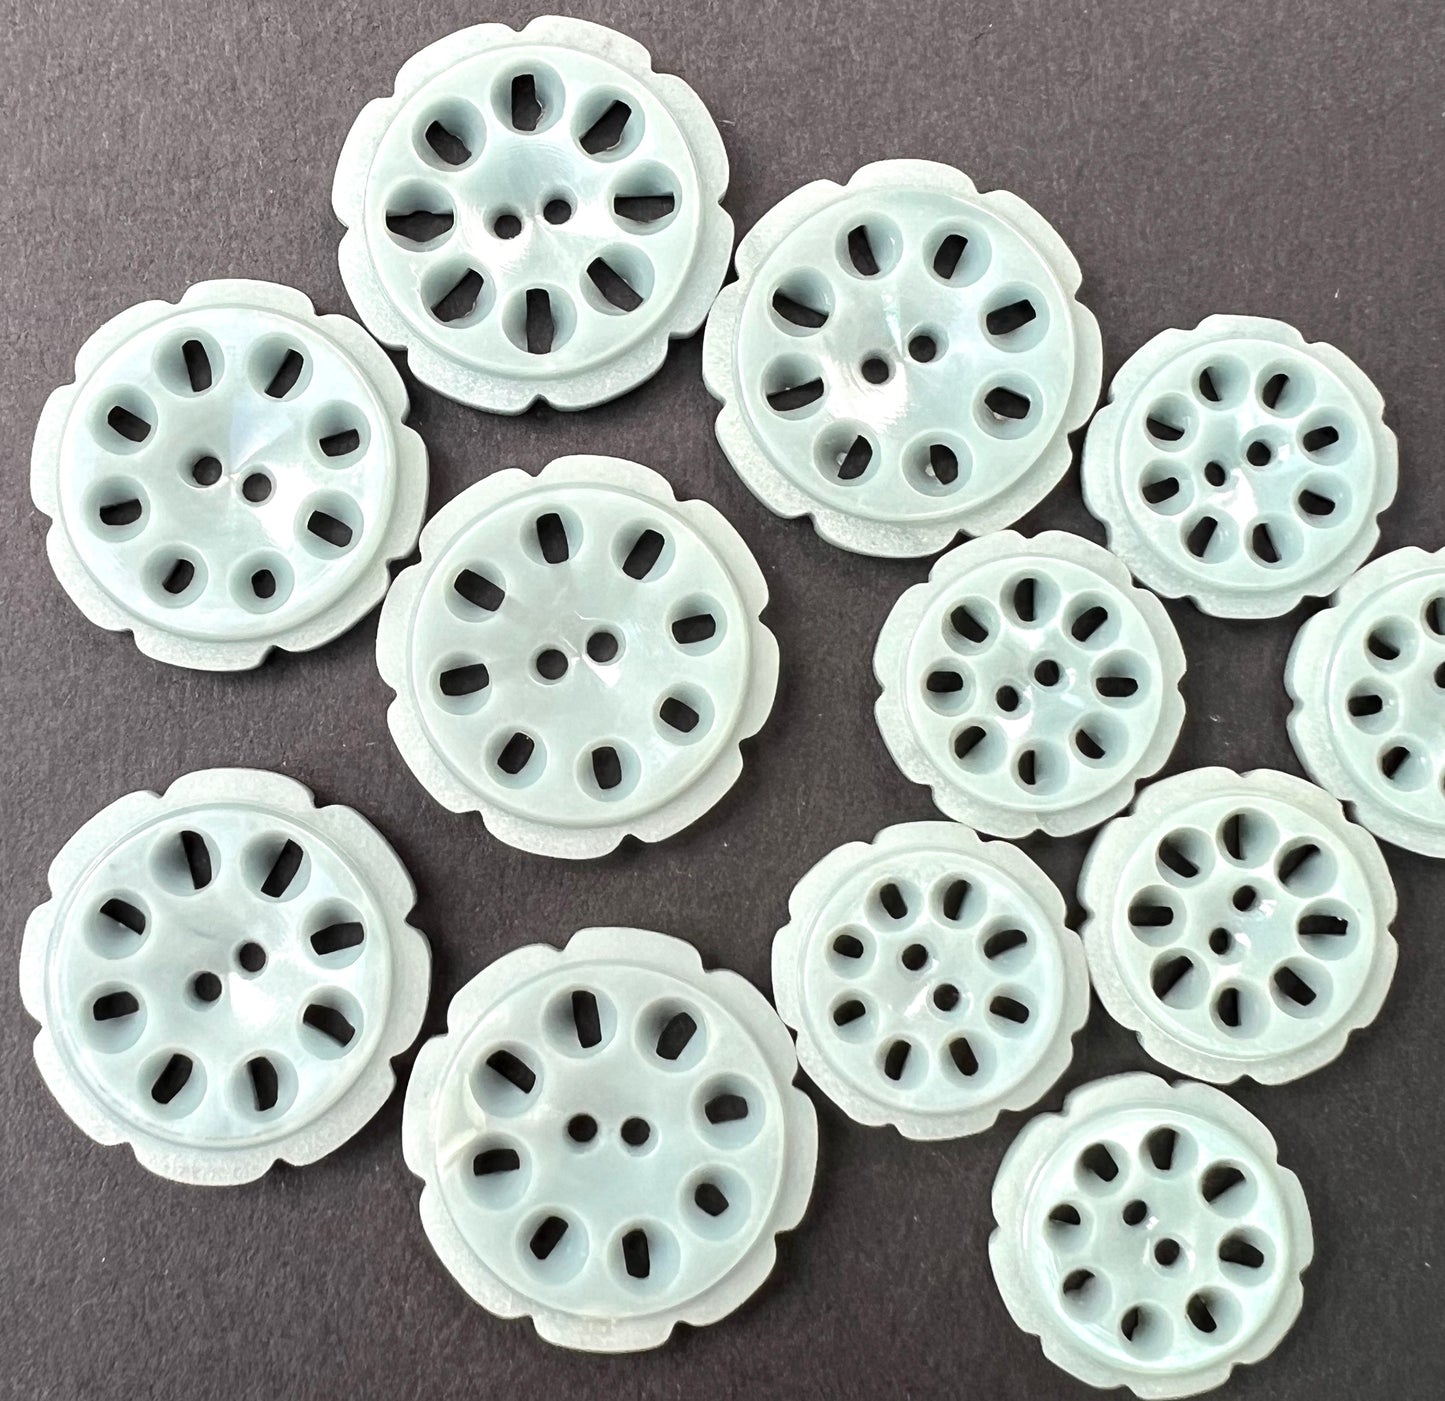 6 or 24 Soft Grey Blue 1.7cm or 2.2cm Vintage French Buttons